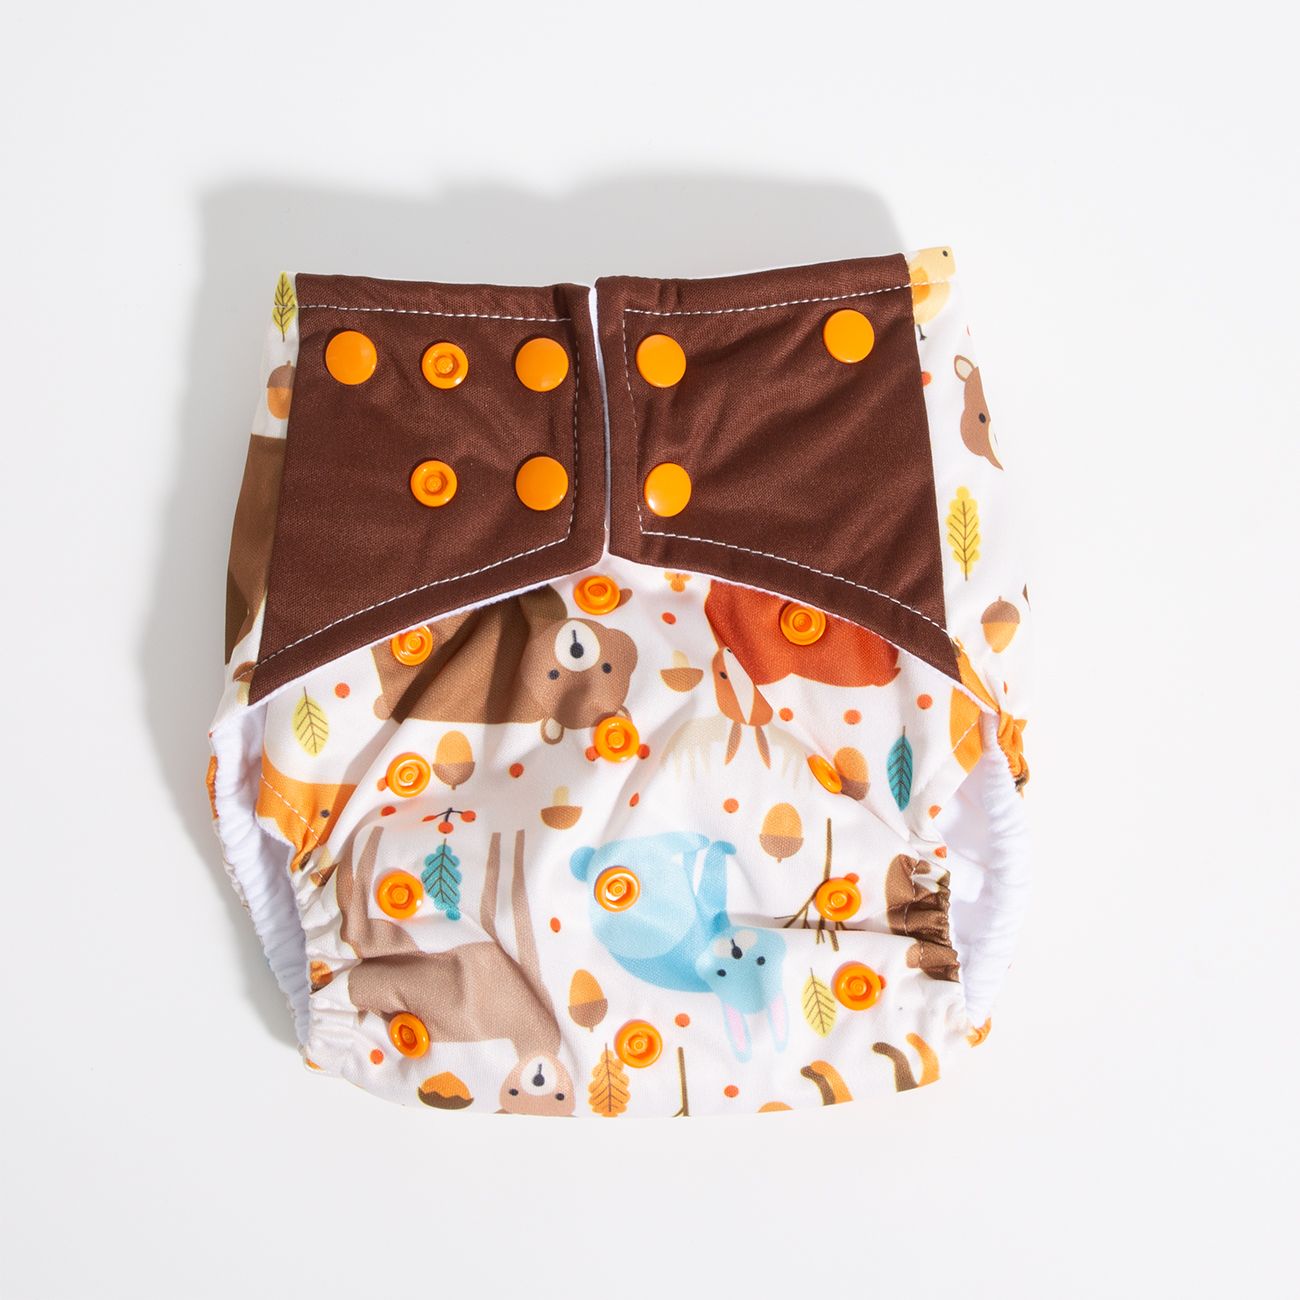 Washable Baby Cloth Diapers - Waterproof And Leakproof With Three-Layer Design For Comfortable Fit